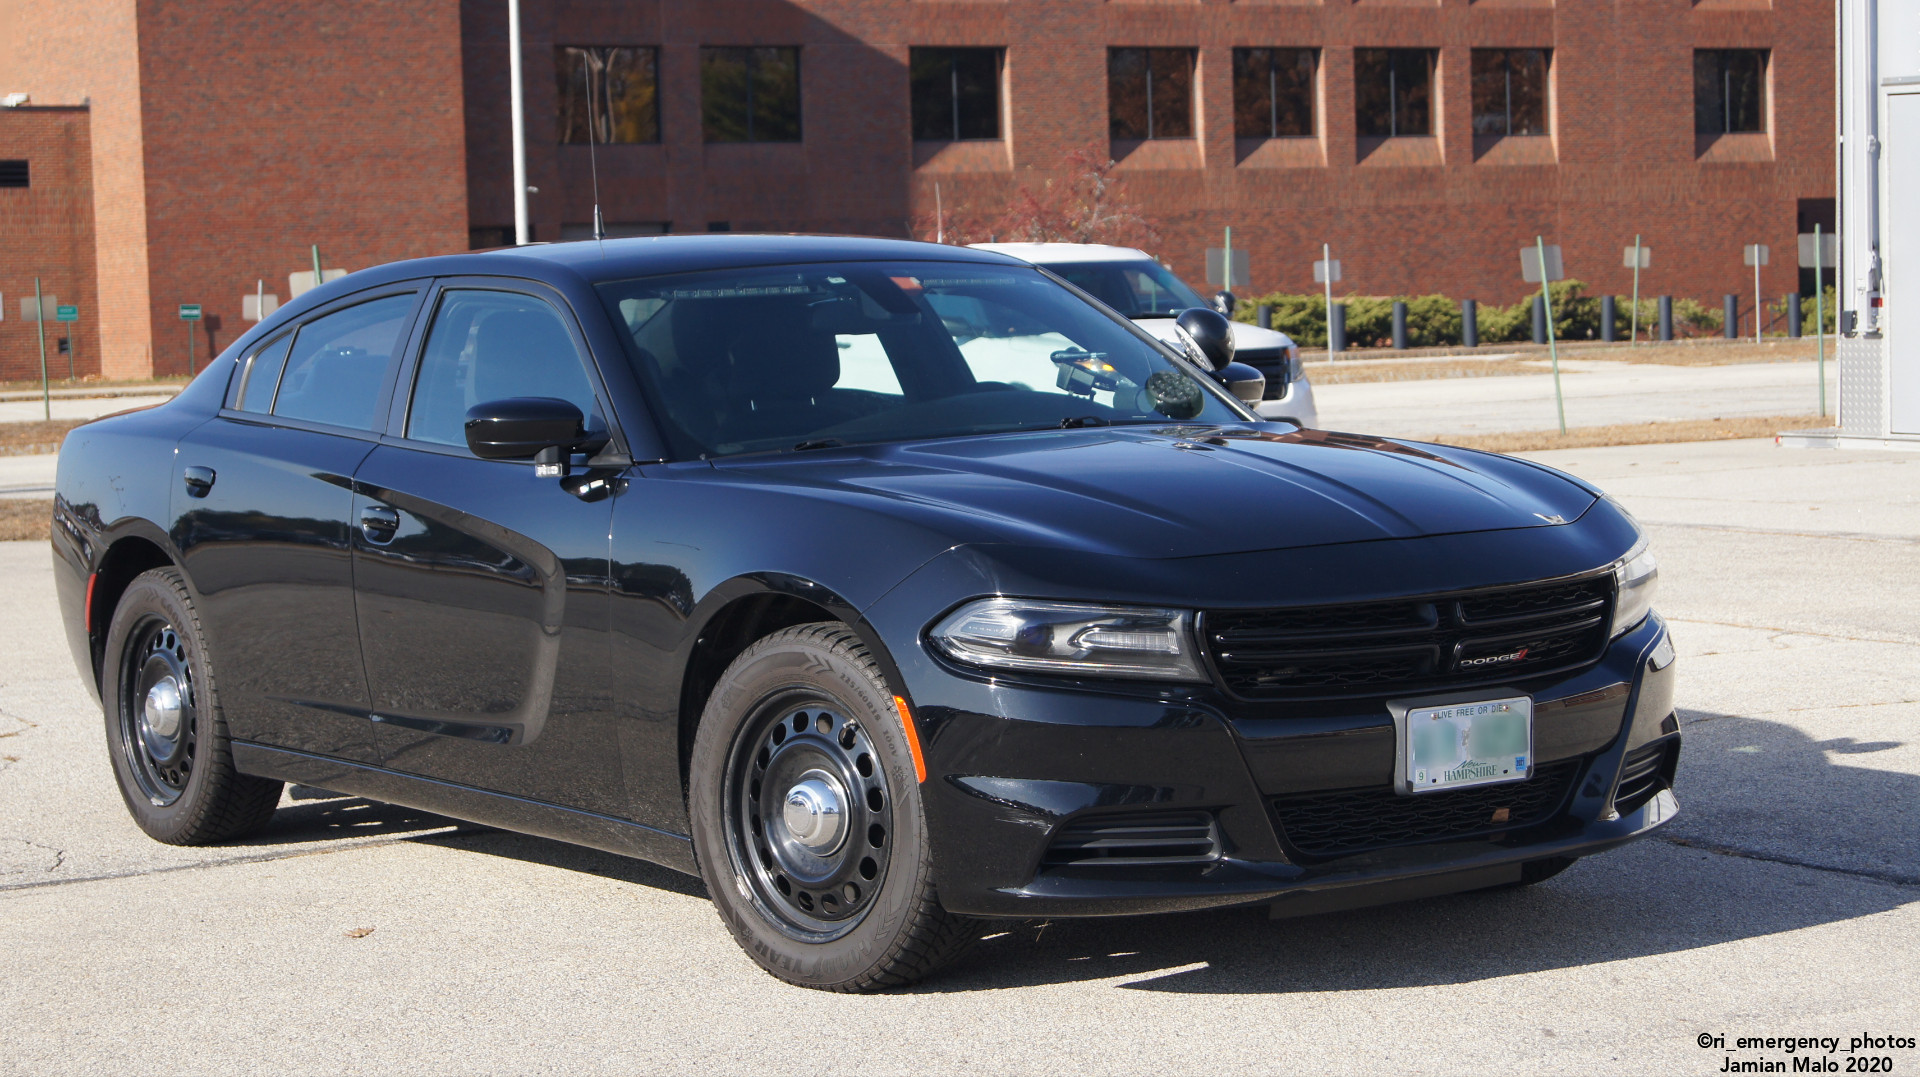 A photo  of New Hampshire State Police
            Unmarked Unit, a 2015-2019 Dodge Charger             taken by Jamian Malo